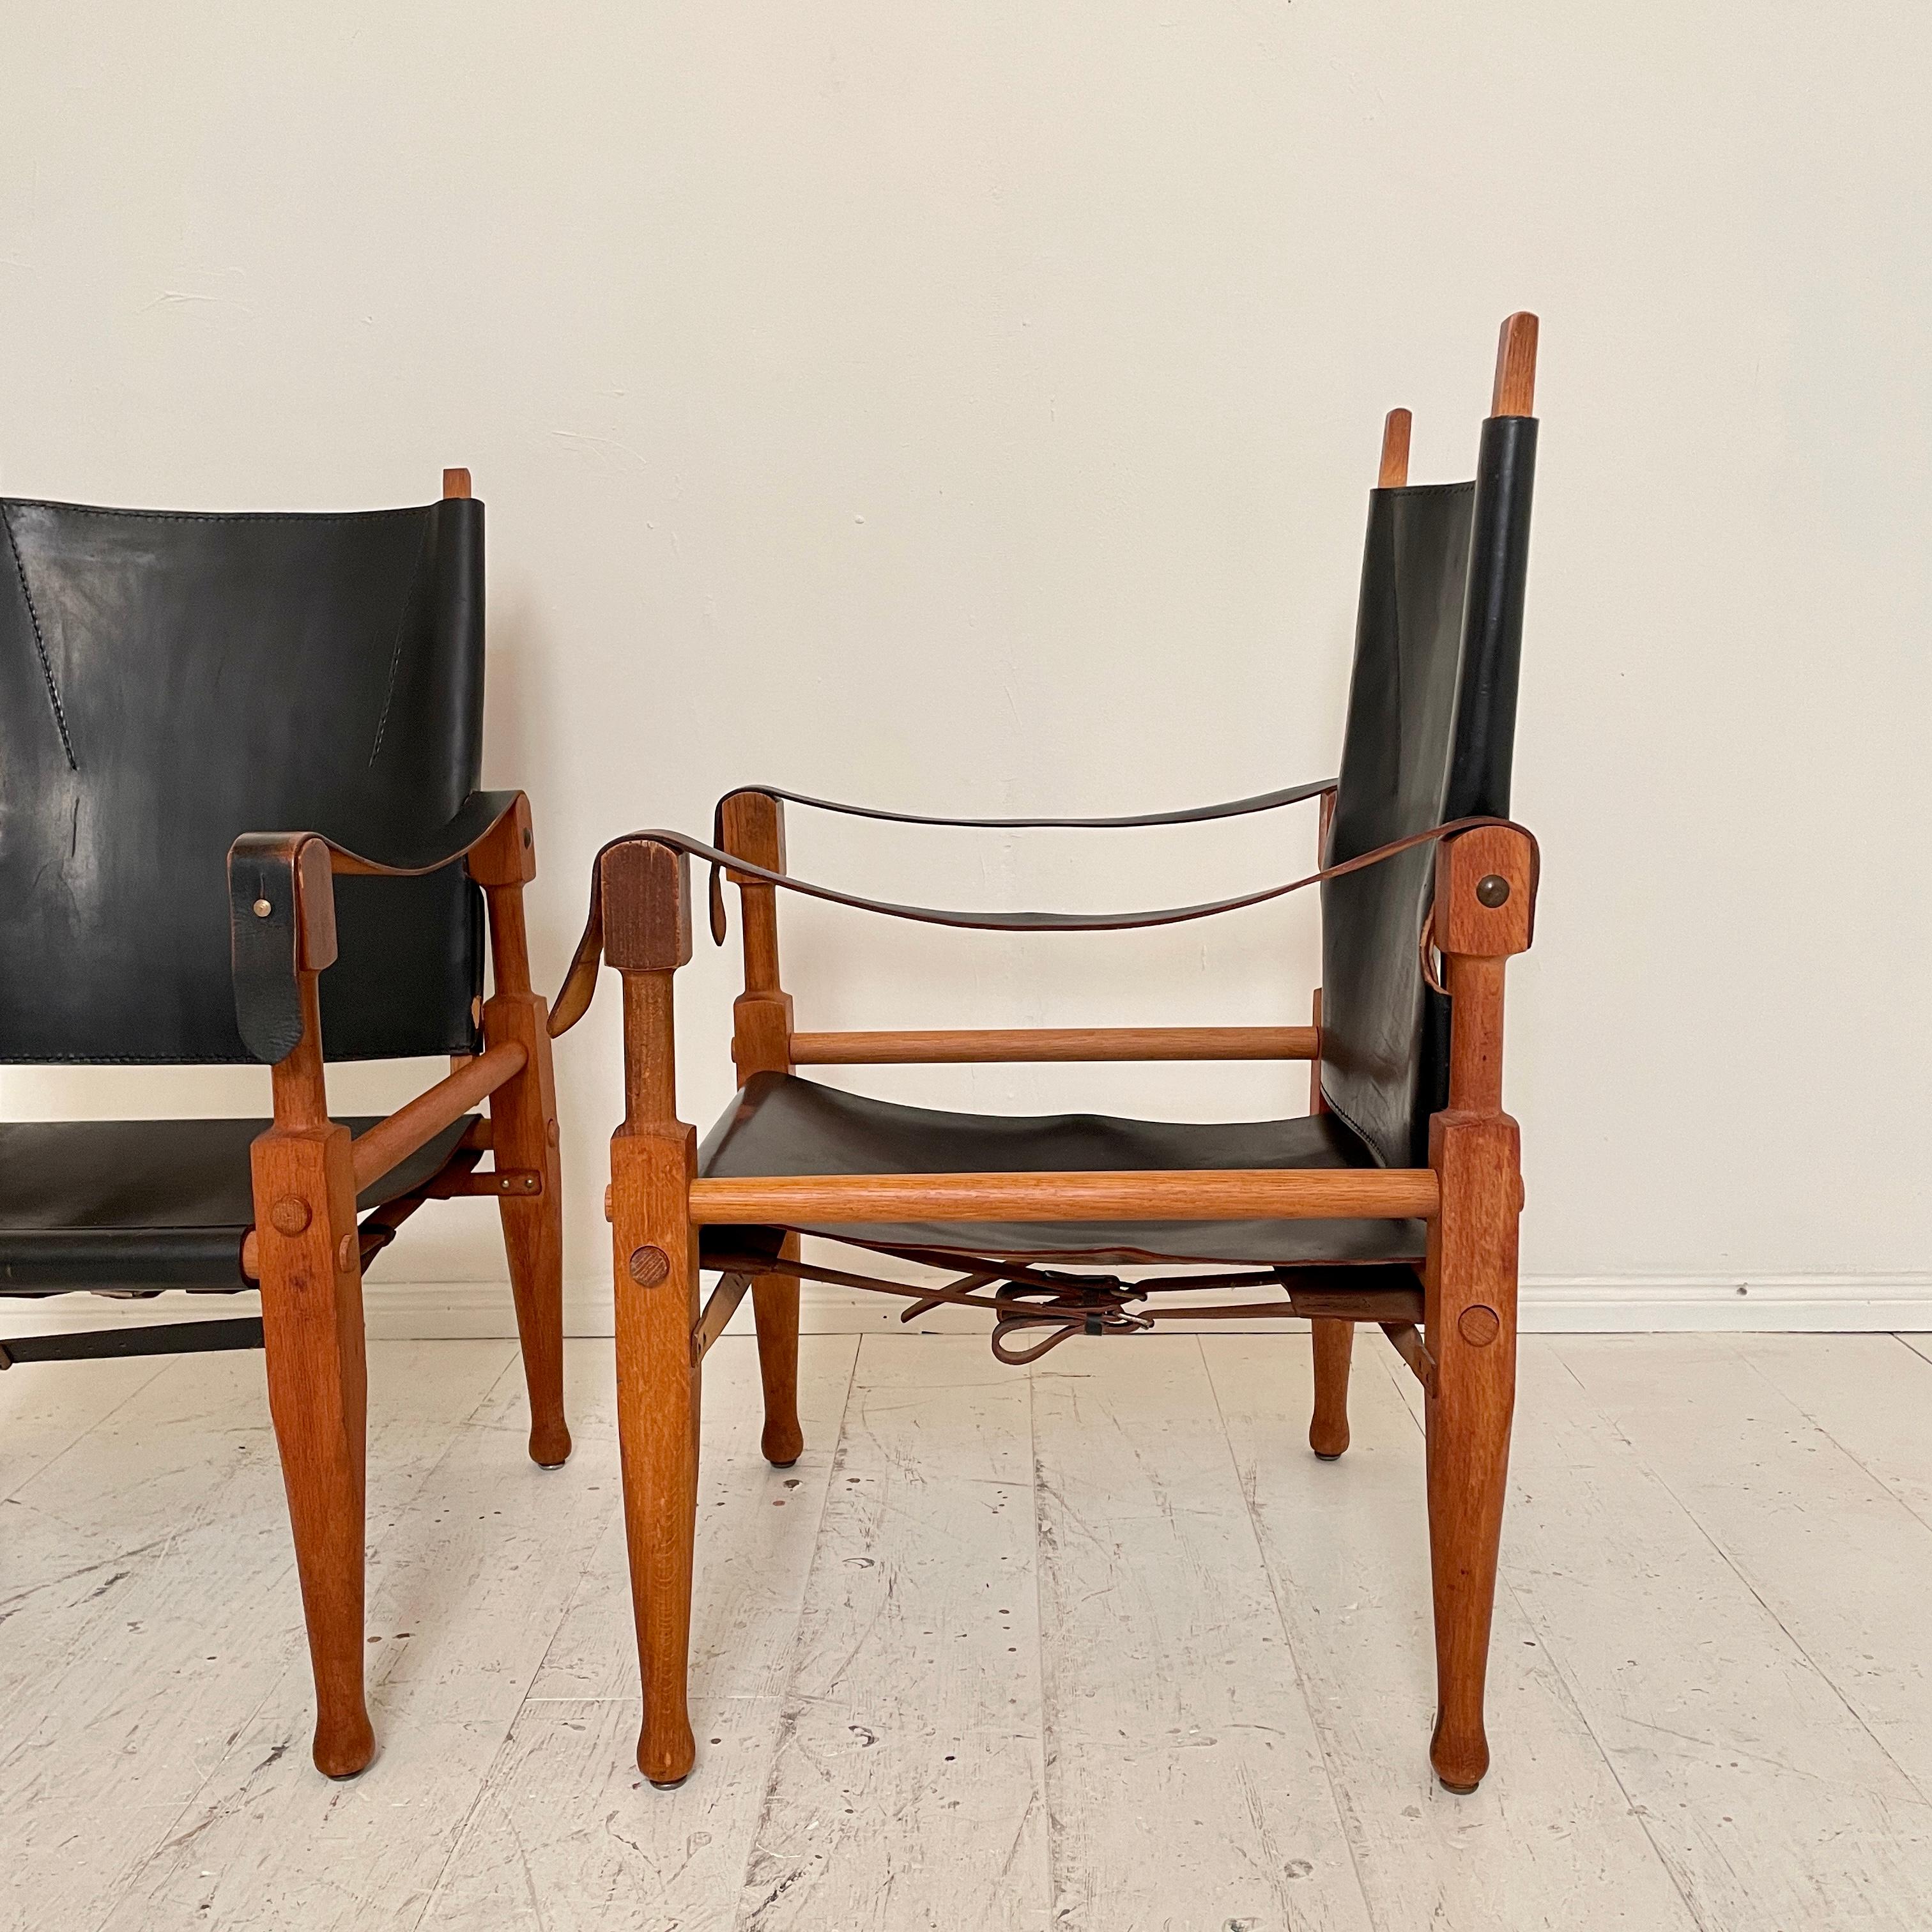 Mid-20th Century Pair of Safari Armchairs by Wilhelm Kienzle in Black Leather and Oak, 1950s